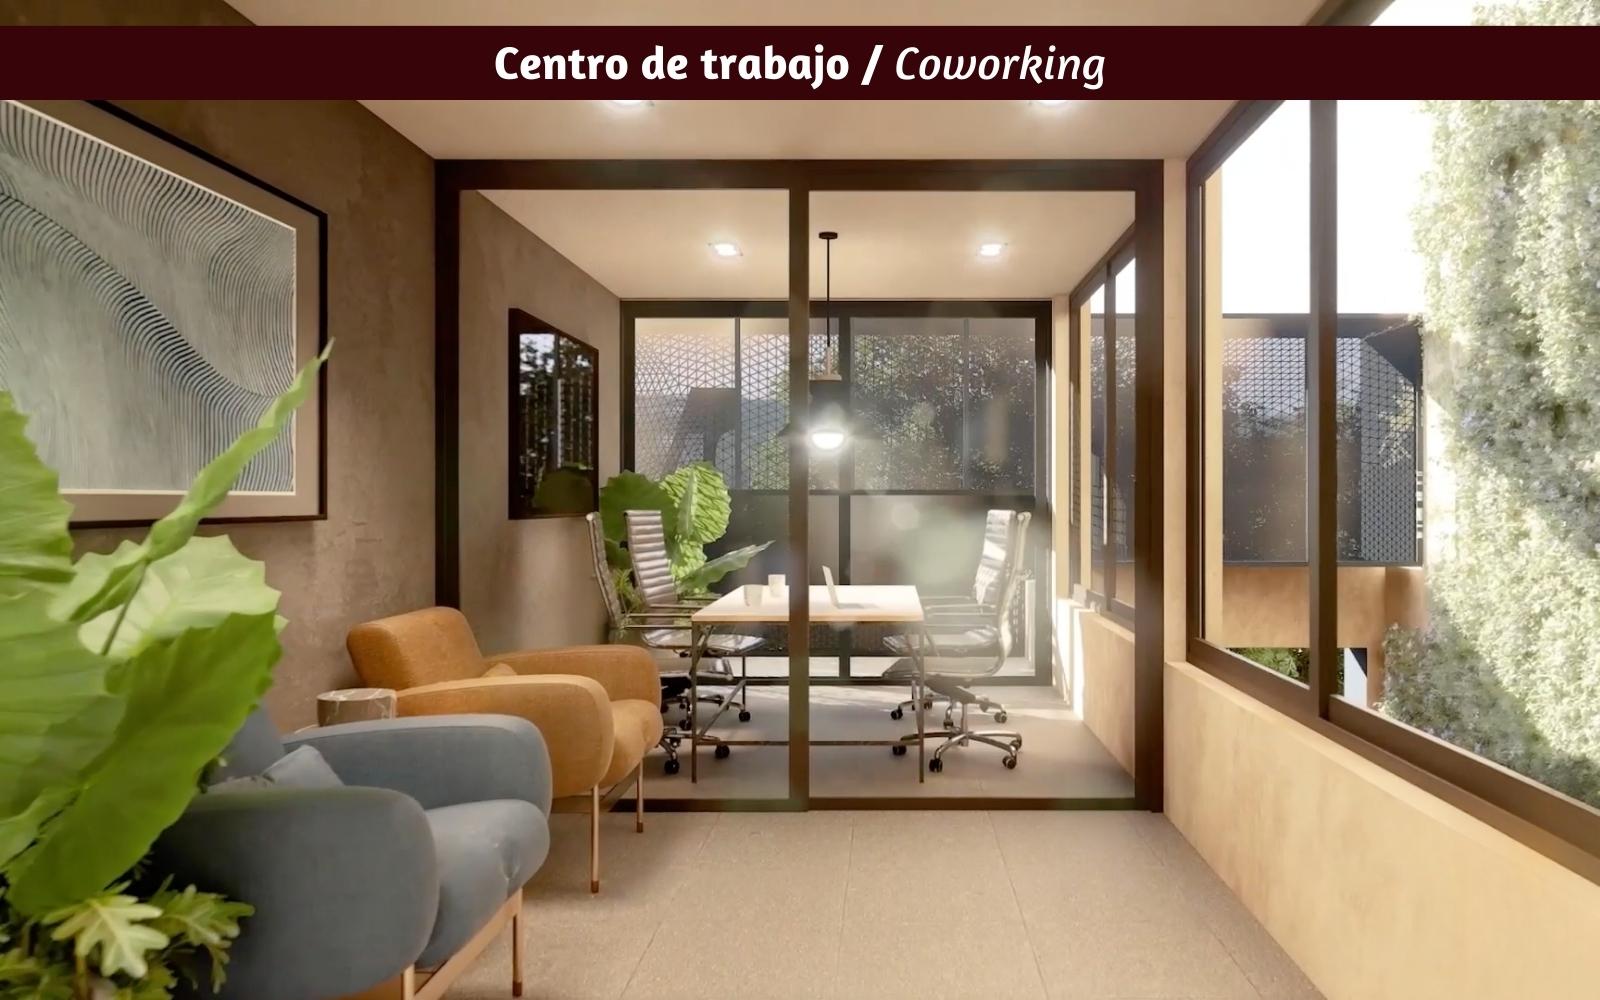 Condominium with private pool, double balcony, pet area, cigar lounge, coworking gym and more for sale Merida Norte